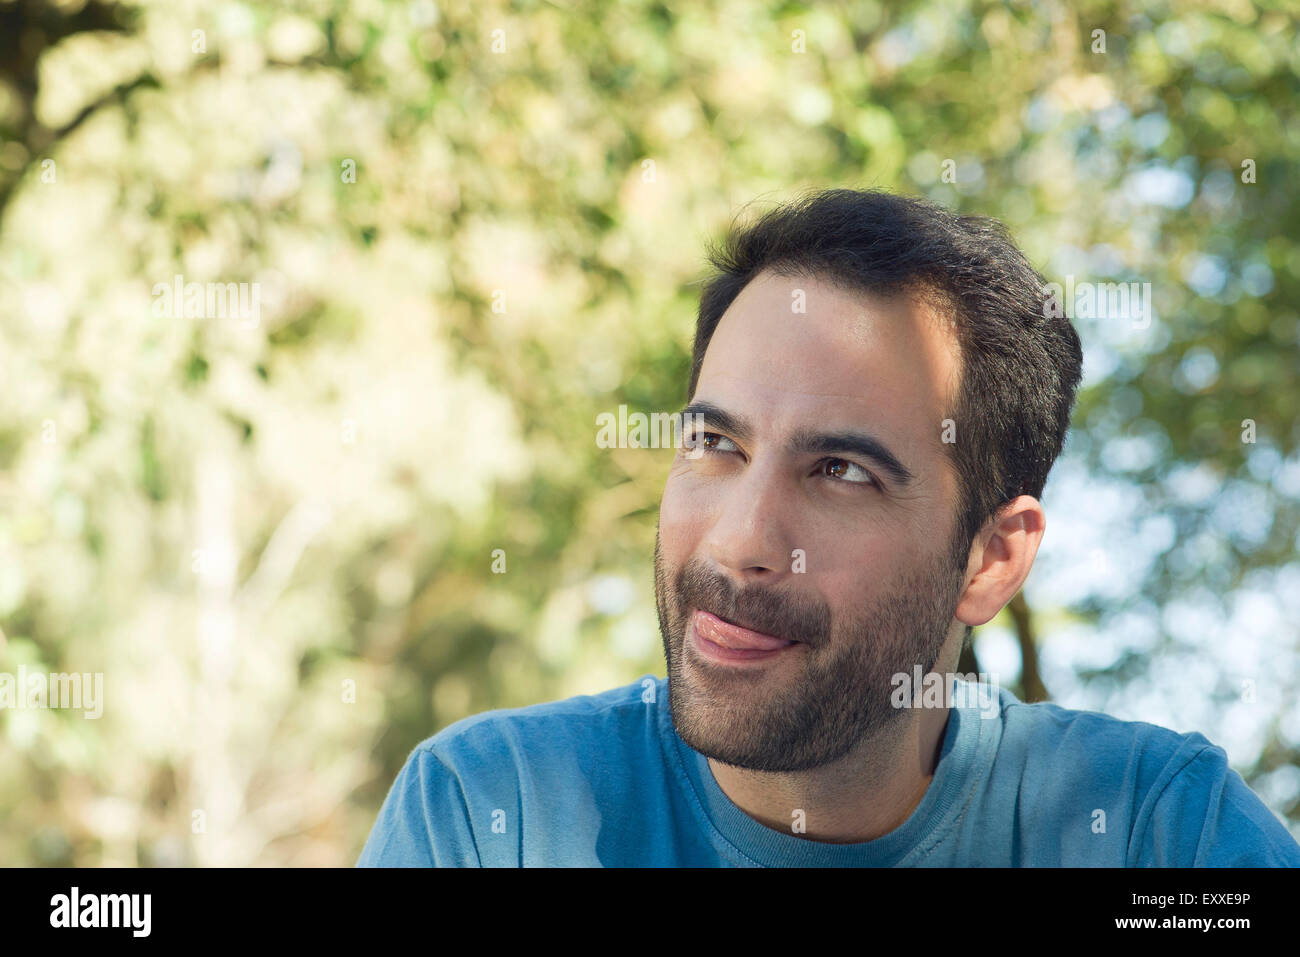 Man licking lips, daydreaming outdoors Stock Photo